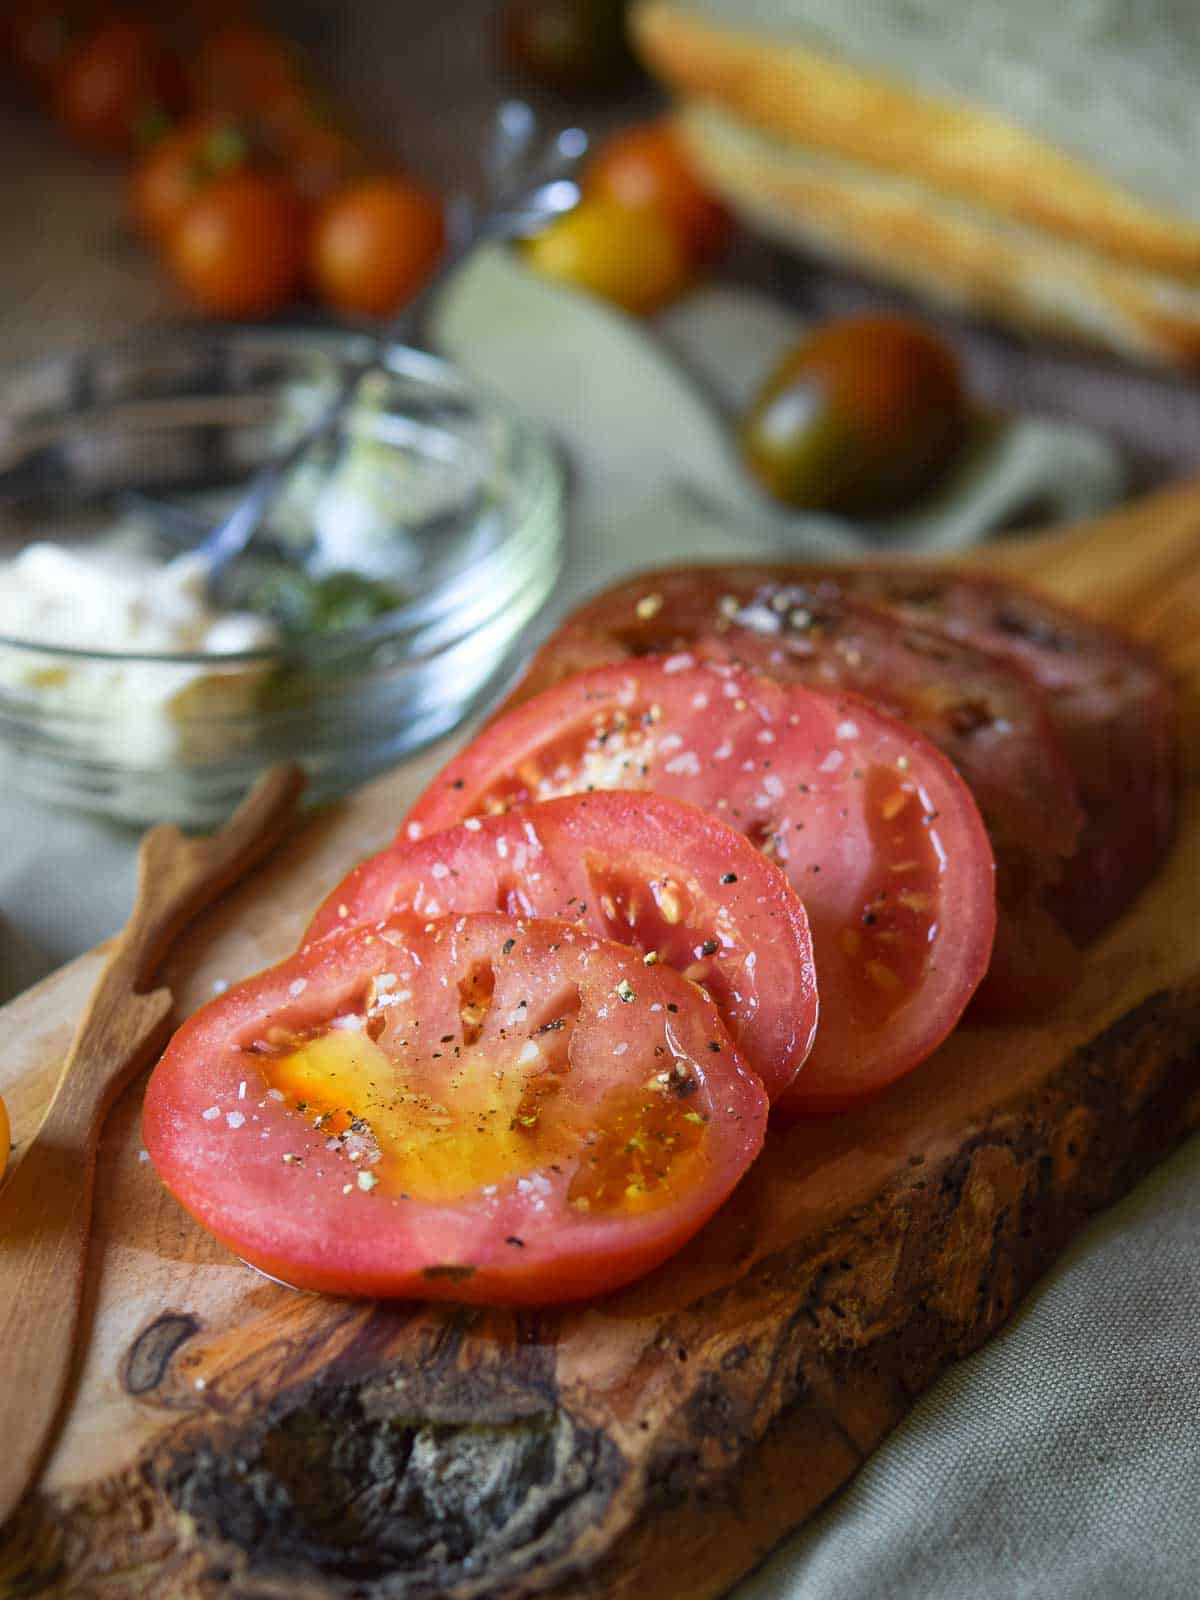 Sliced seasoned tomatoes on a wood board, with bread and pesto in the background.